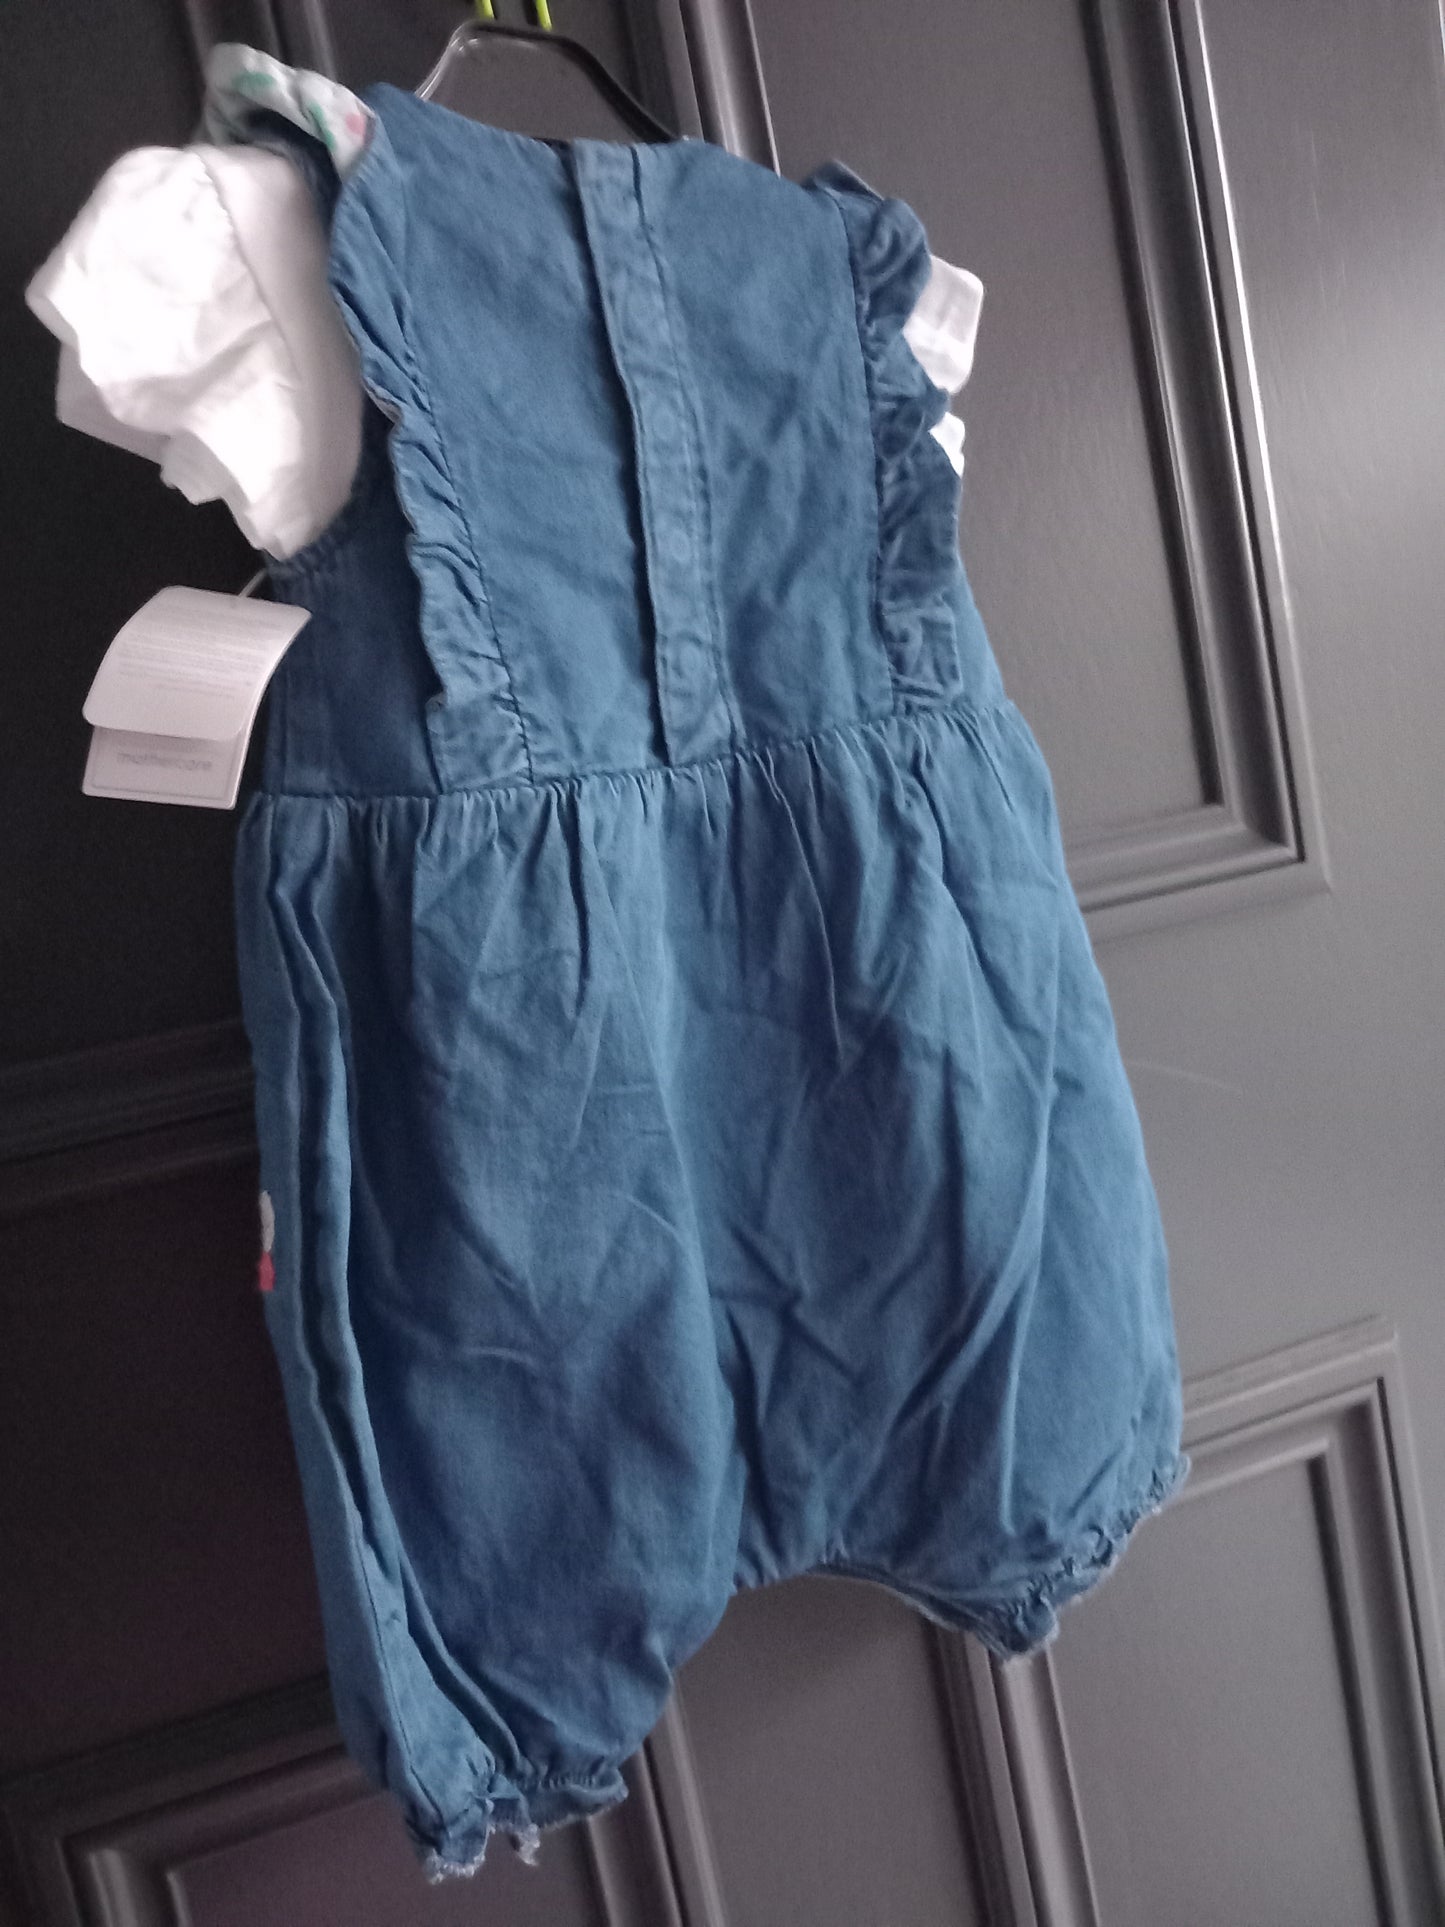 BABY COLOURED FLOWER TWO PIECE DENIM DUNGAREES